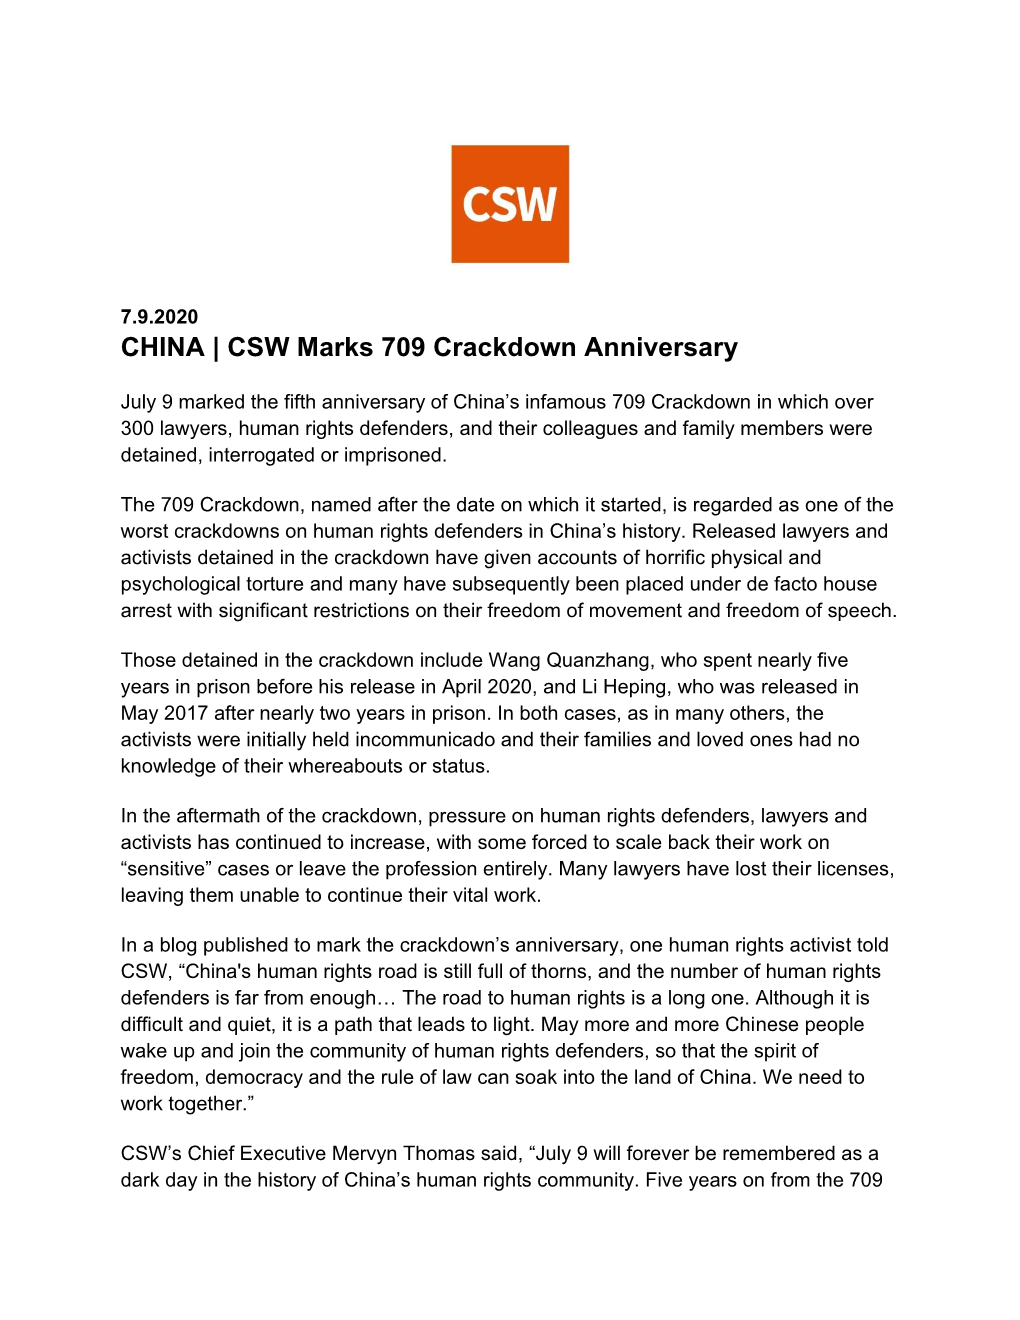 CHINA | CSW Marks 709 Crackdown Anniversary